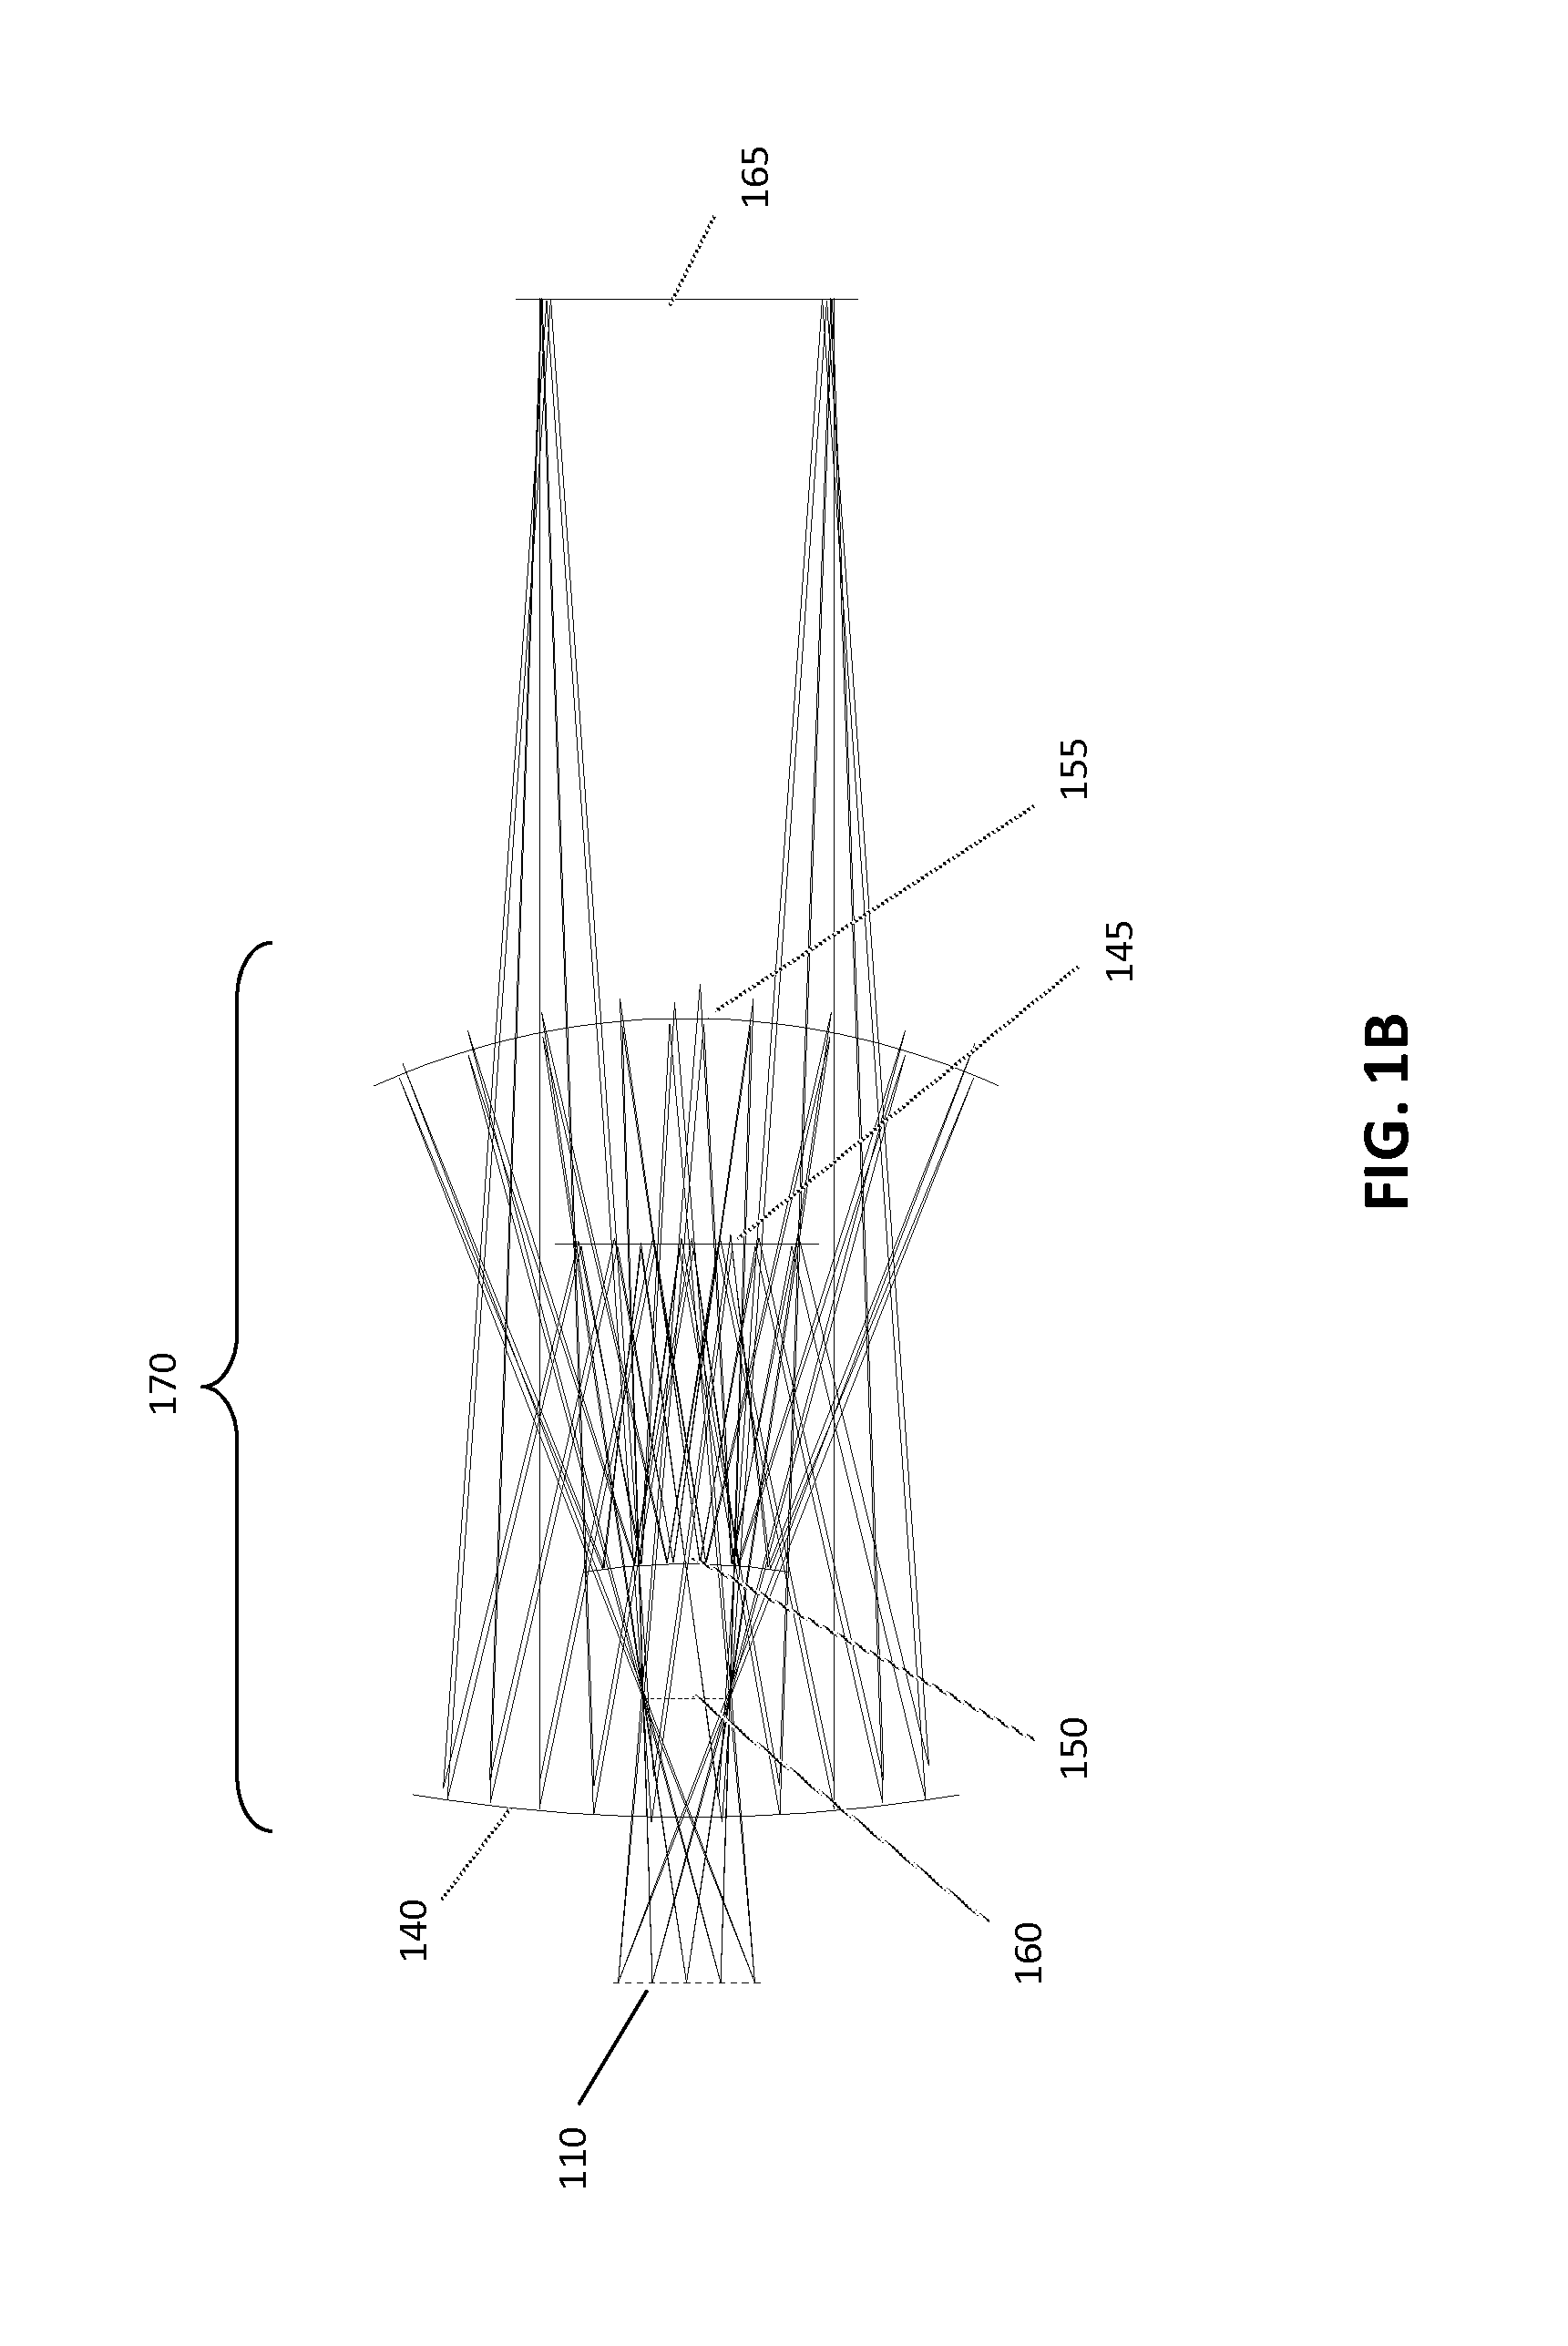 Optical forms for multi-channel double-pass dispersive spectrometers